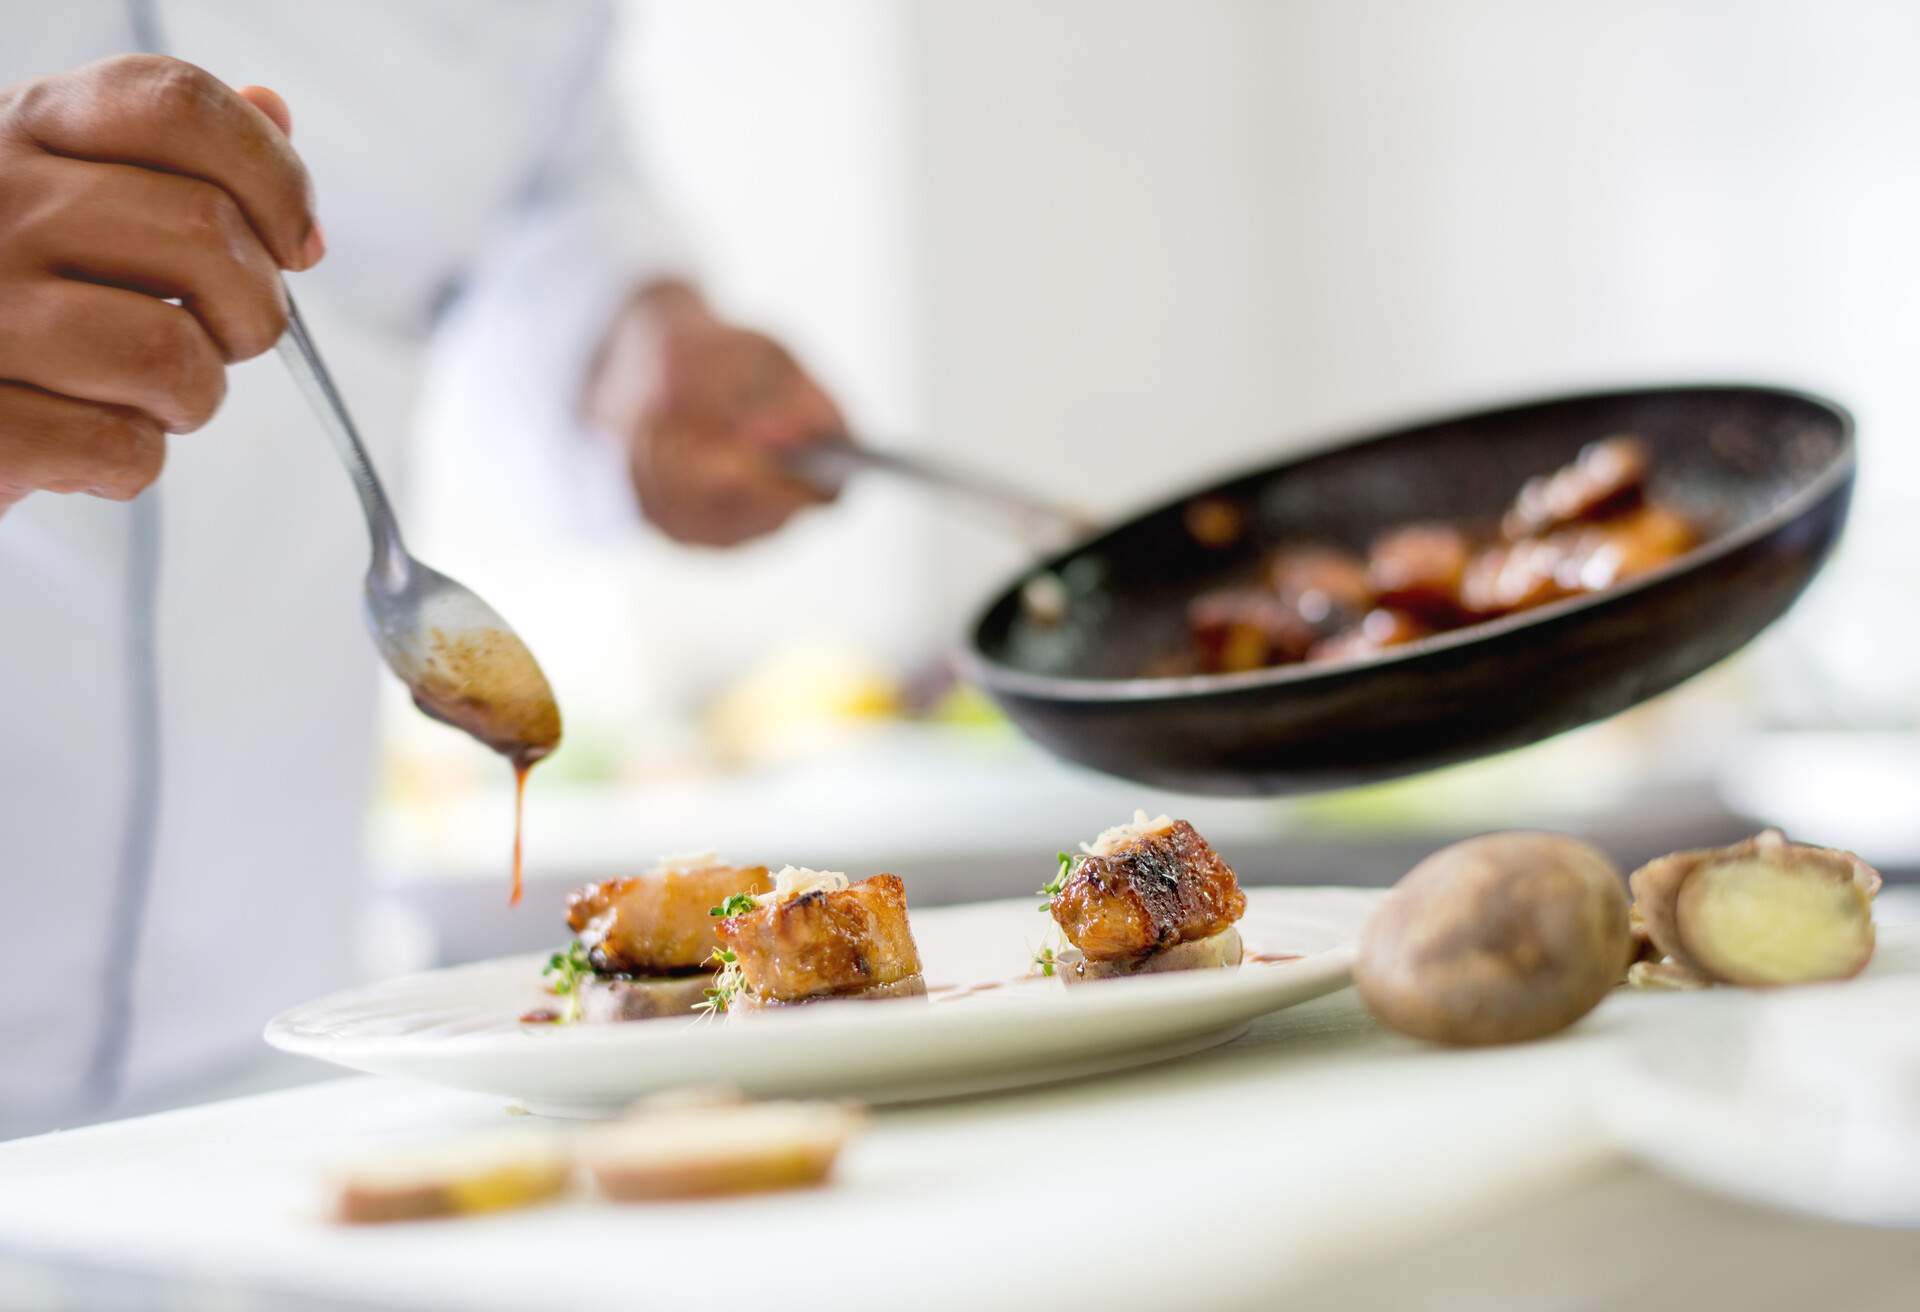 Chef serving a plate in a commercial kitchen at a restaurant - food concepts